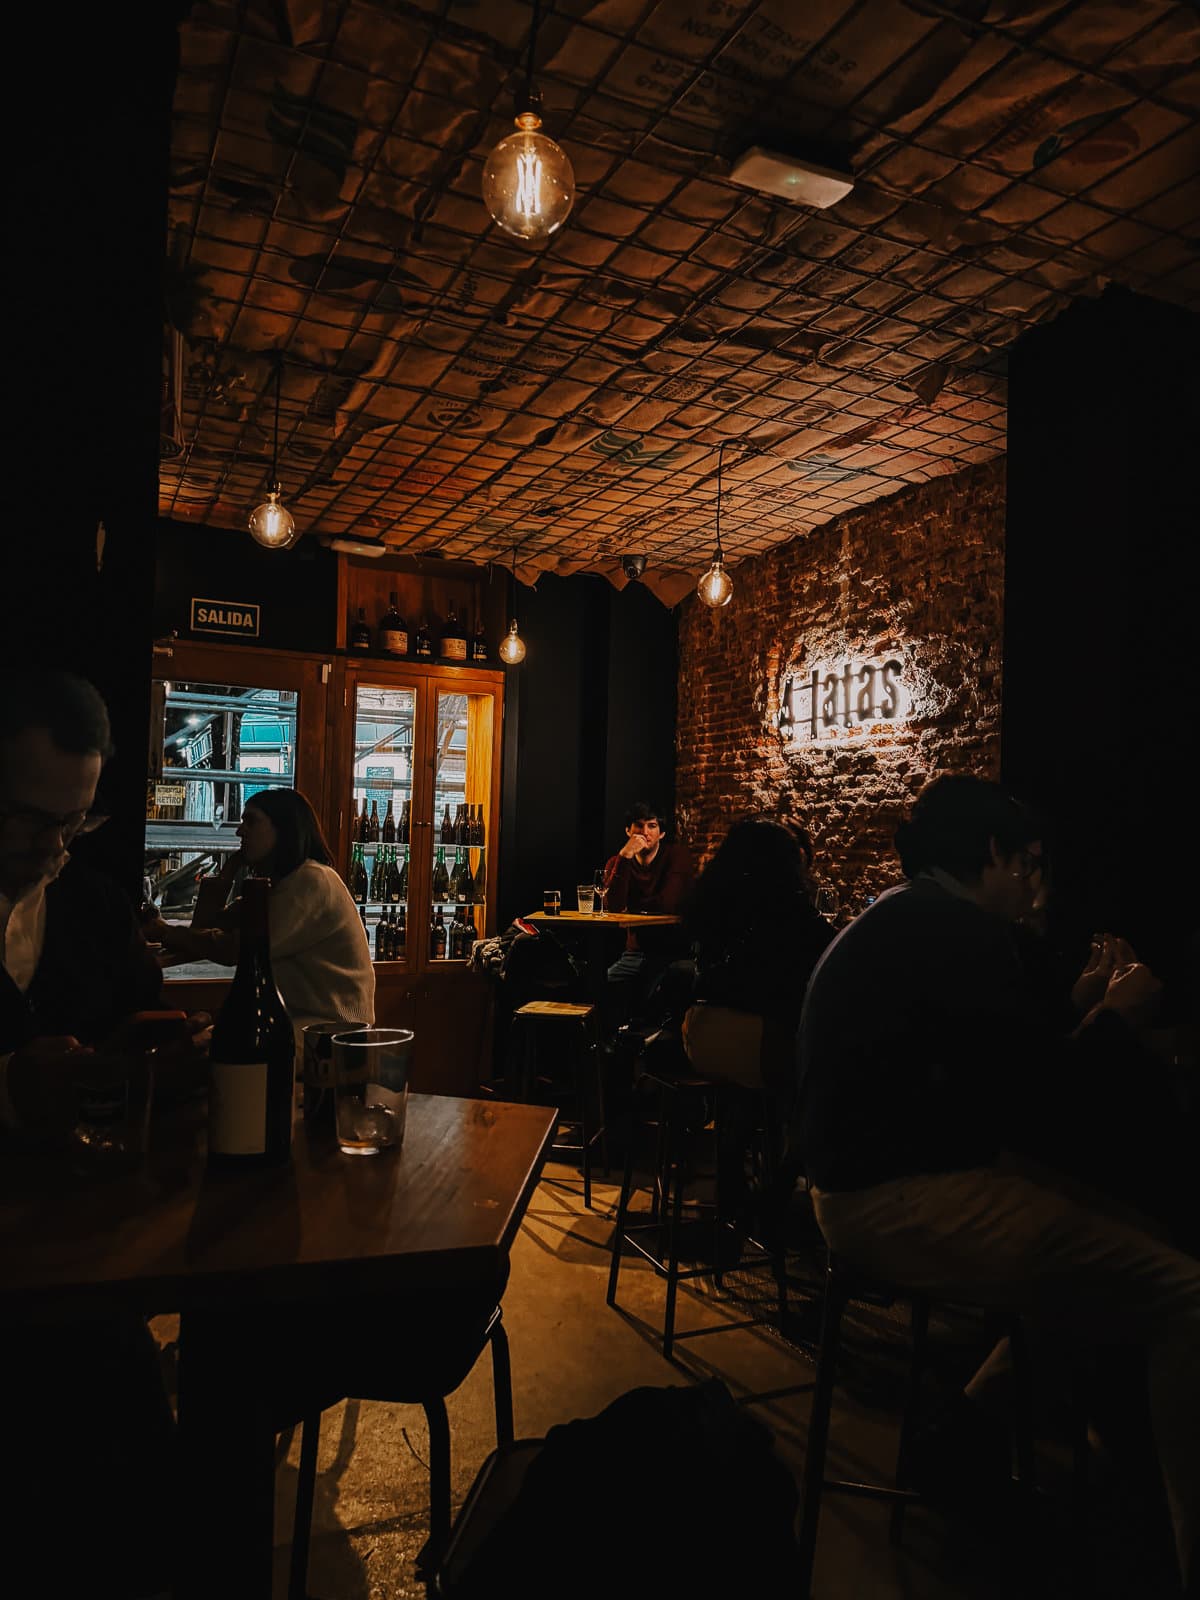 Dimly lit cozy tapas bar with exposed brick walls and warm lighting, patrons dining and conversing in a relaxed atmosphere, highlighting the word 'tapas' illuminated on the wall